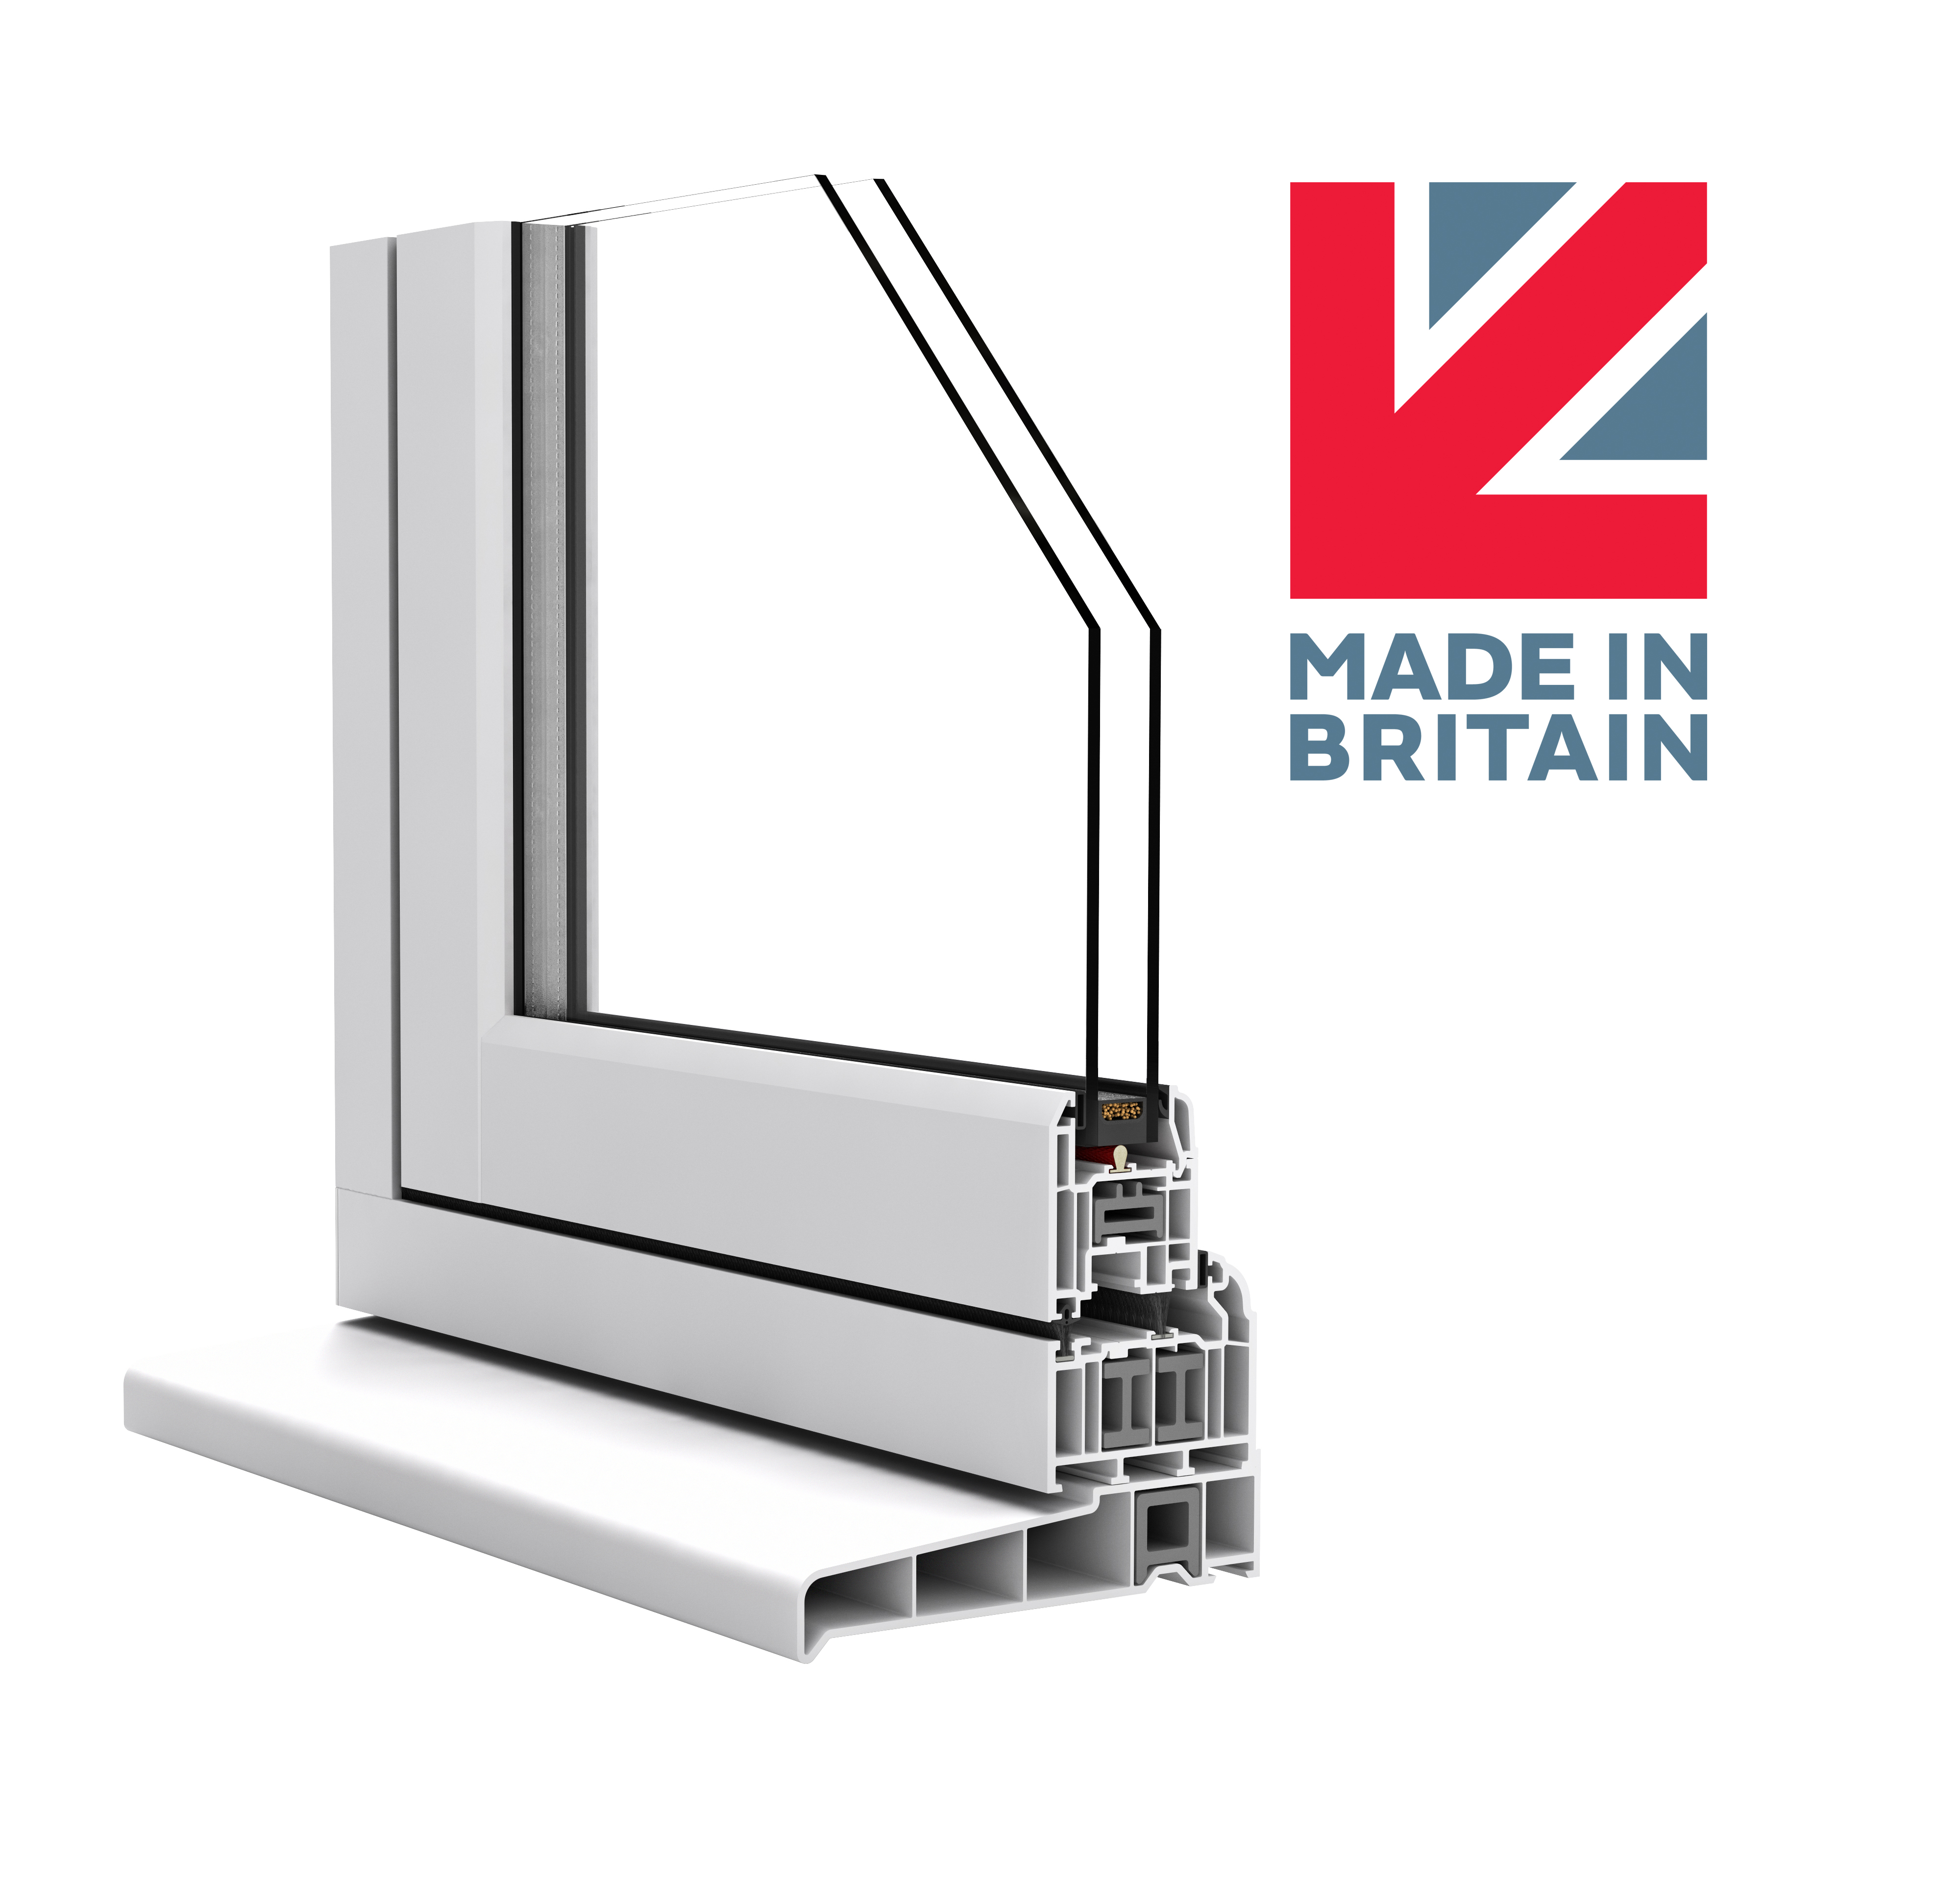 Epwin Window Systems joins Made in Britain campaign